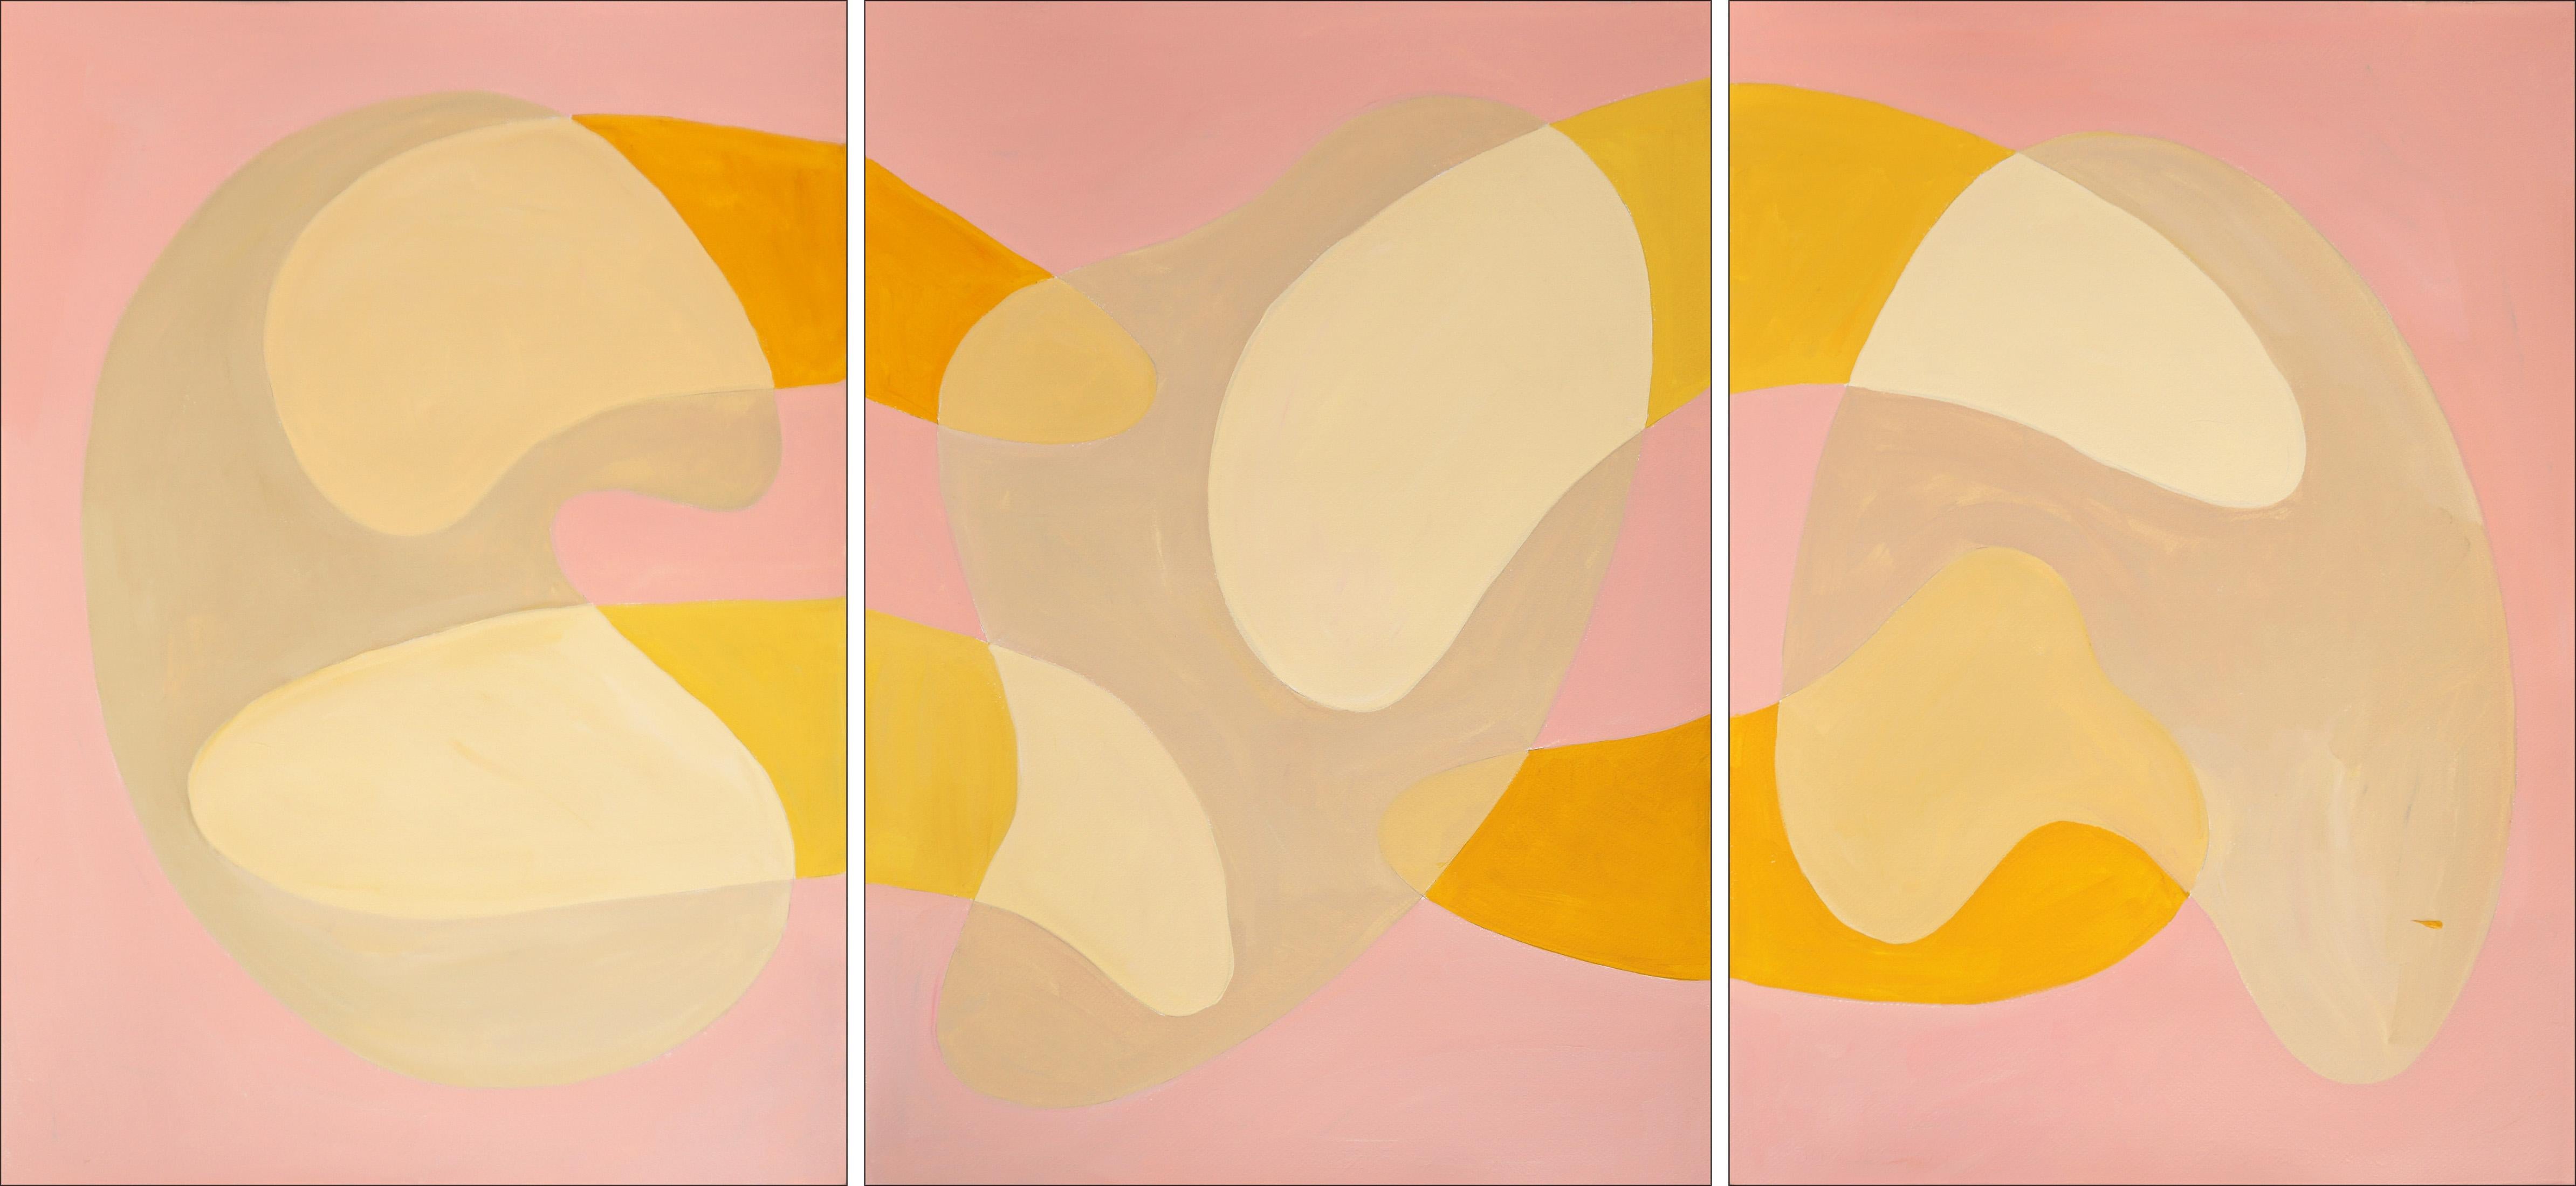 Ryan Rivadeneyra Abstract Painting - Pink Lagoon Sands, Mid-Century Shapes Triptych, Abstract Gold Transparencies 